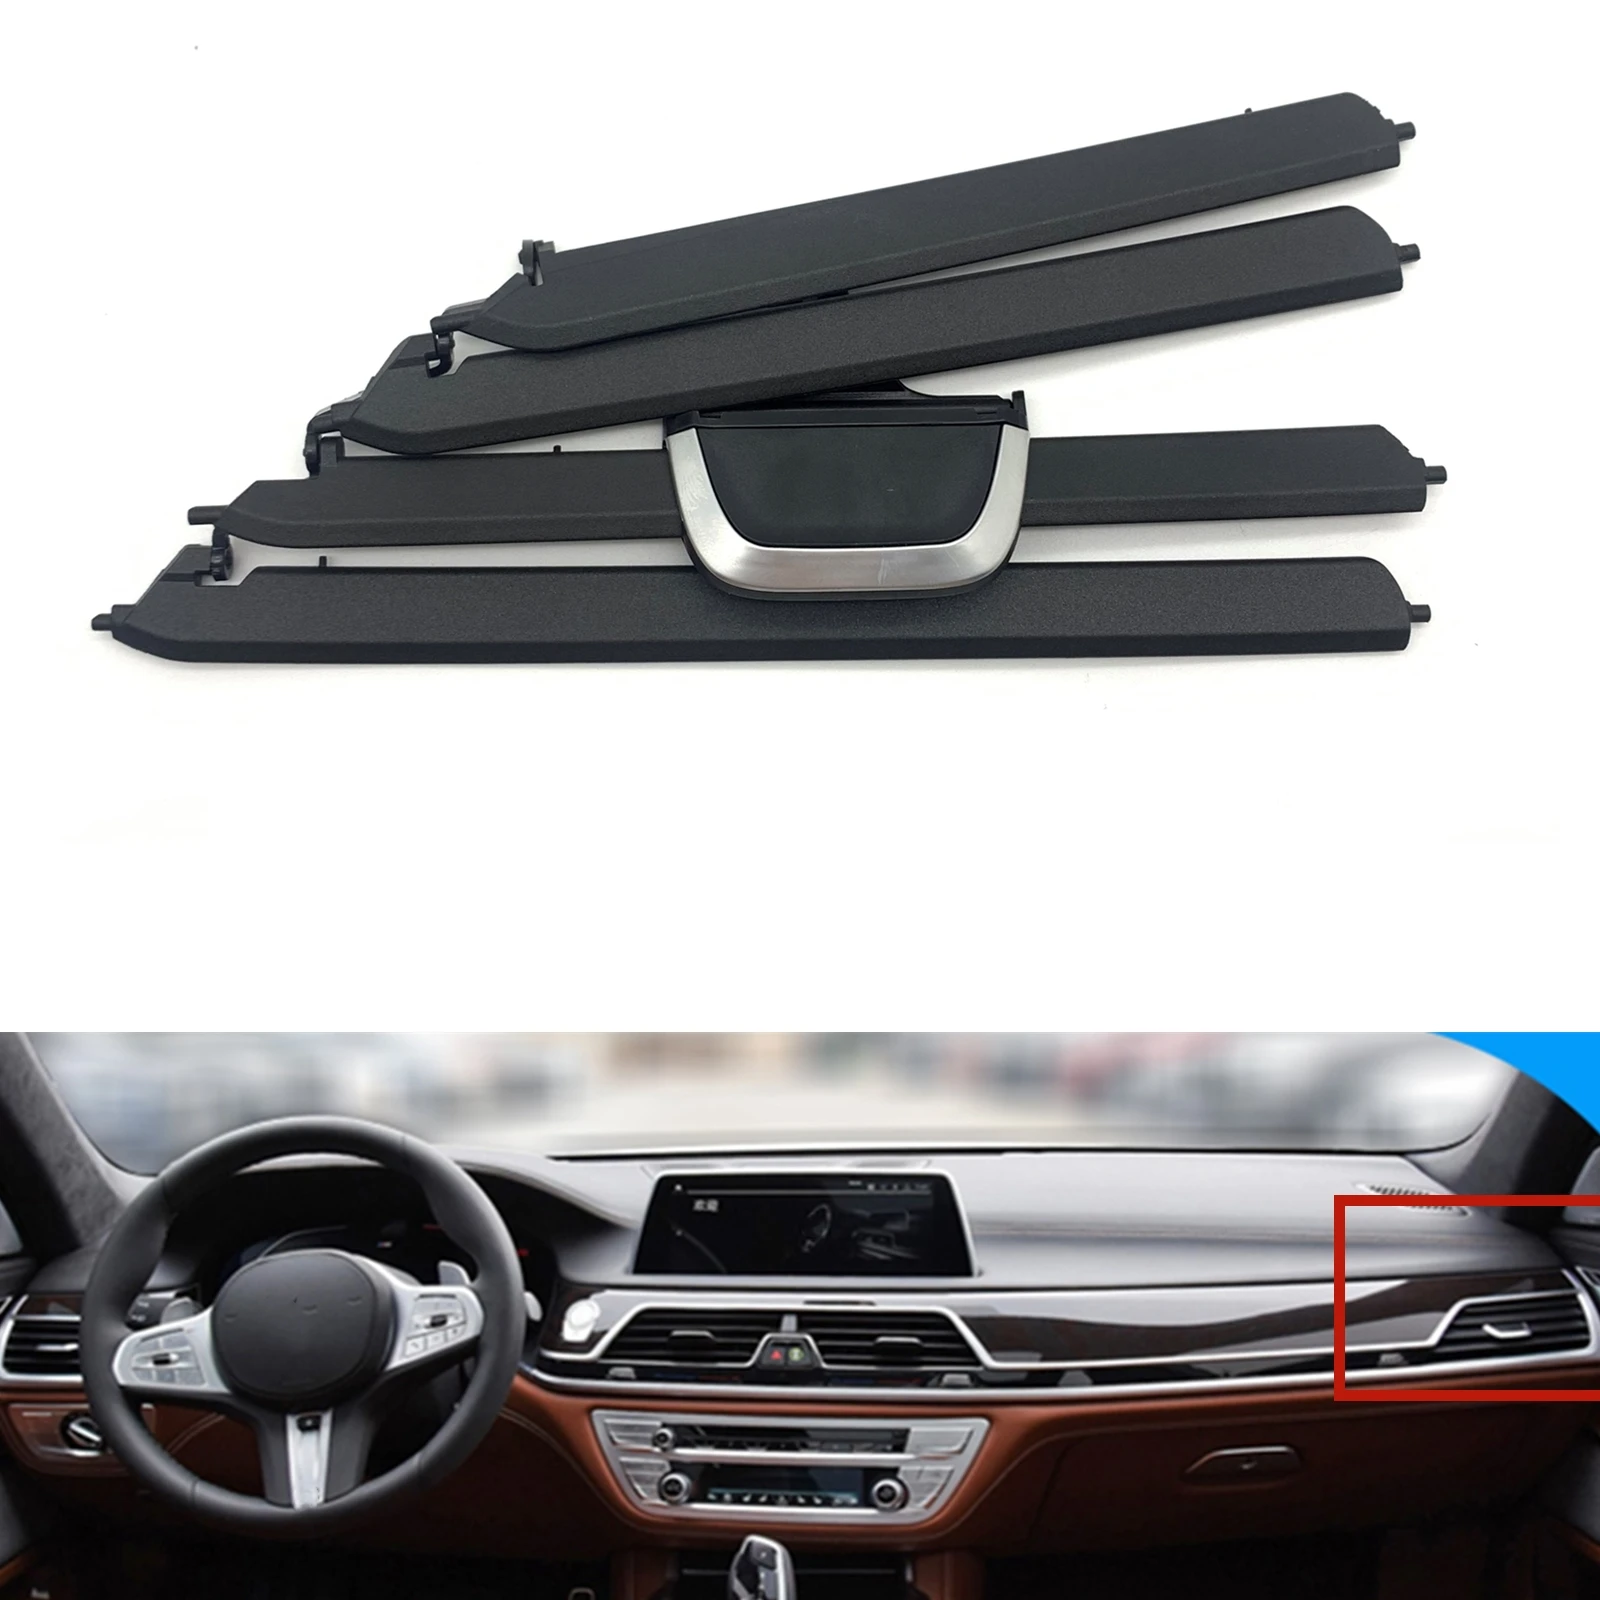 

Center/Side Air Panel Cover Frame A/C Vent Grill Outlet Clip Repair Kit For BMW 7 Series G11 G12 2016-2022